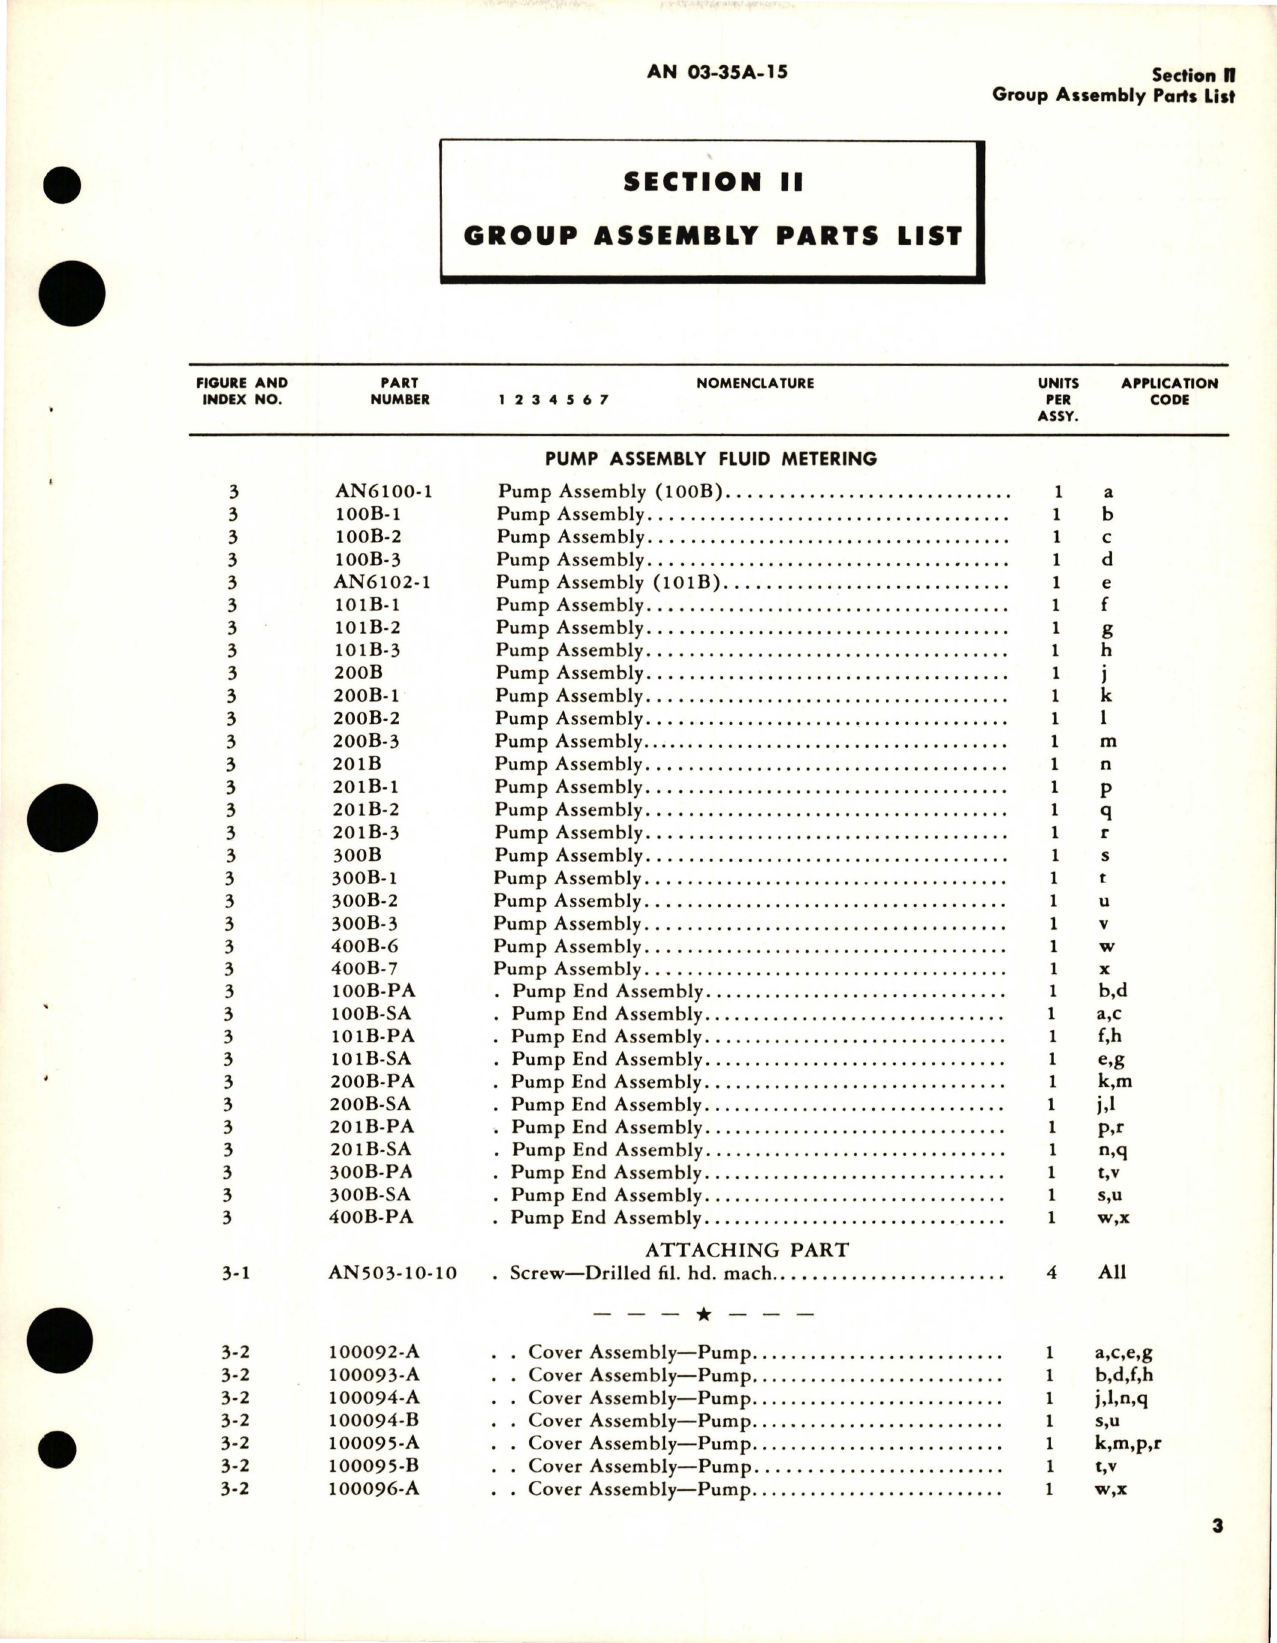 Sample page 7 from AirCorps Library document: Parts Catalog for Anti-Icing Pumps